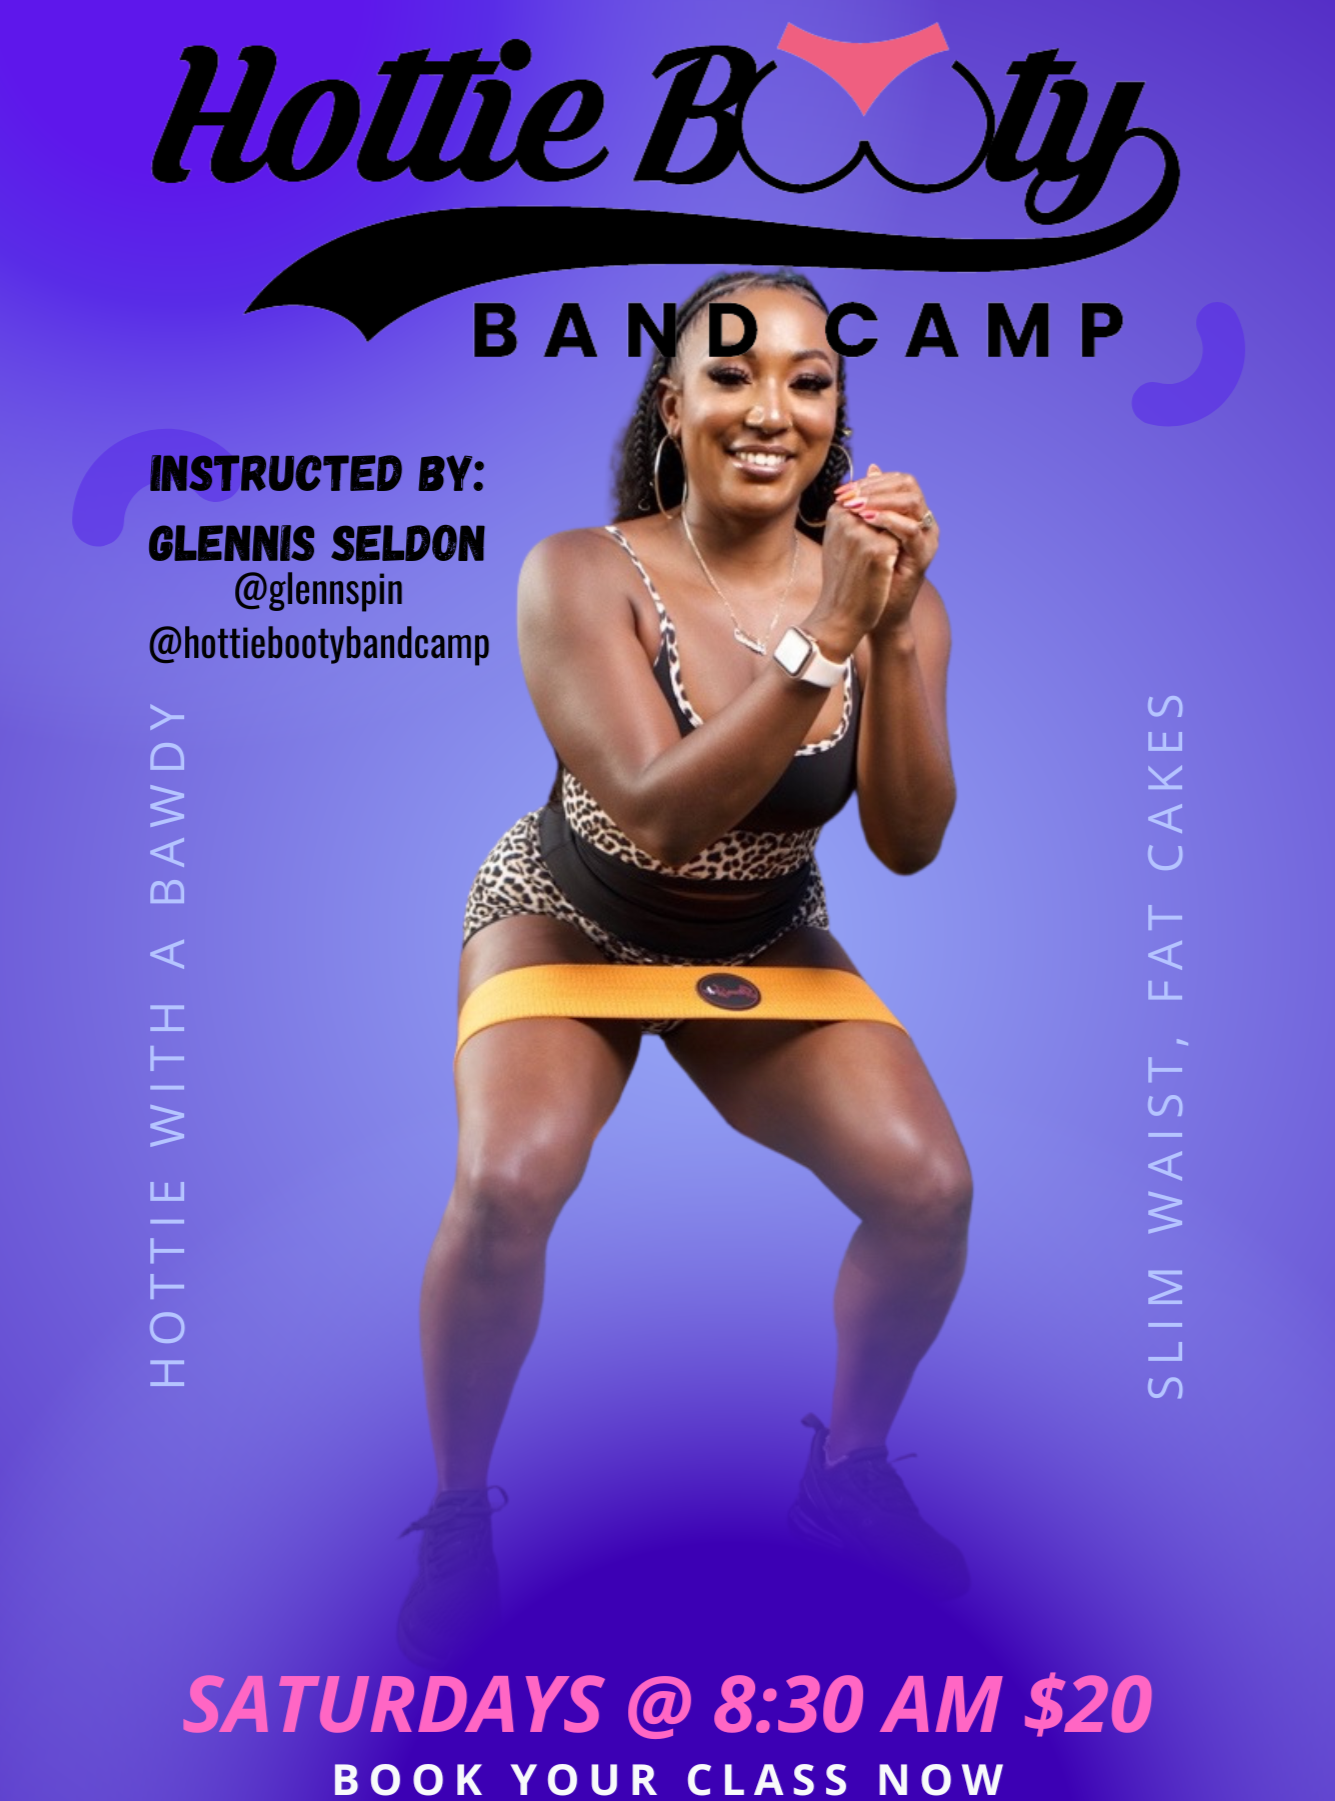 Hottie Booty Band Camp - GlennSpin 